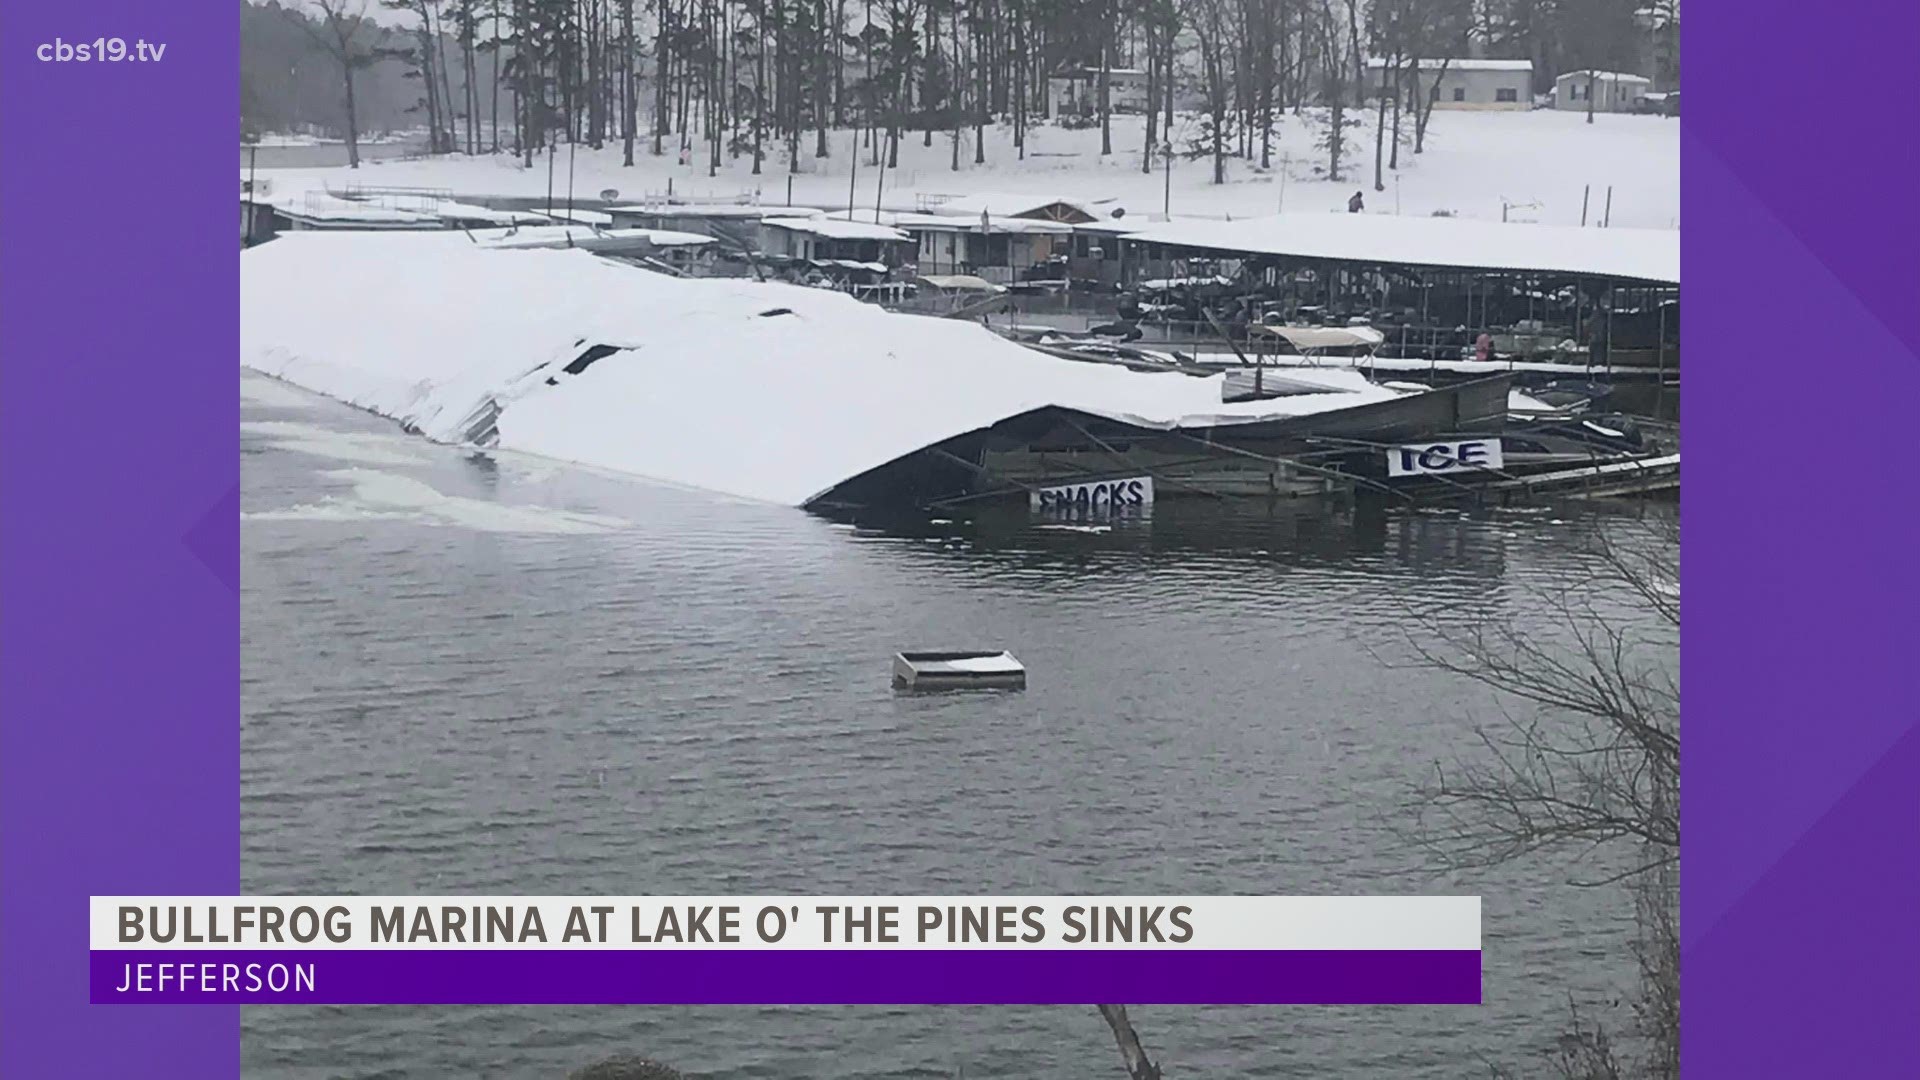 According to their website, the marina has been on Lake O' the Pines since 1959.